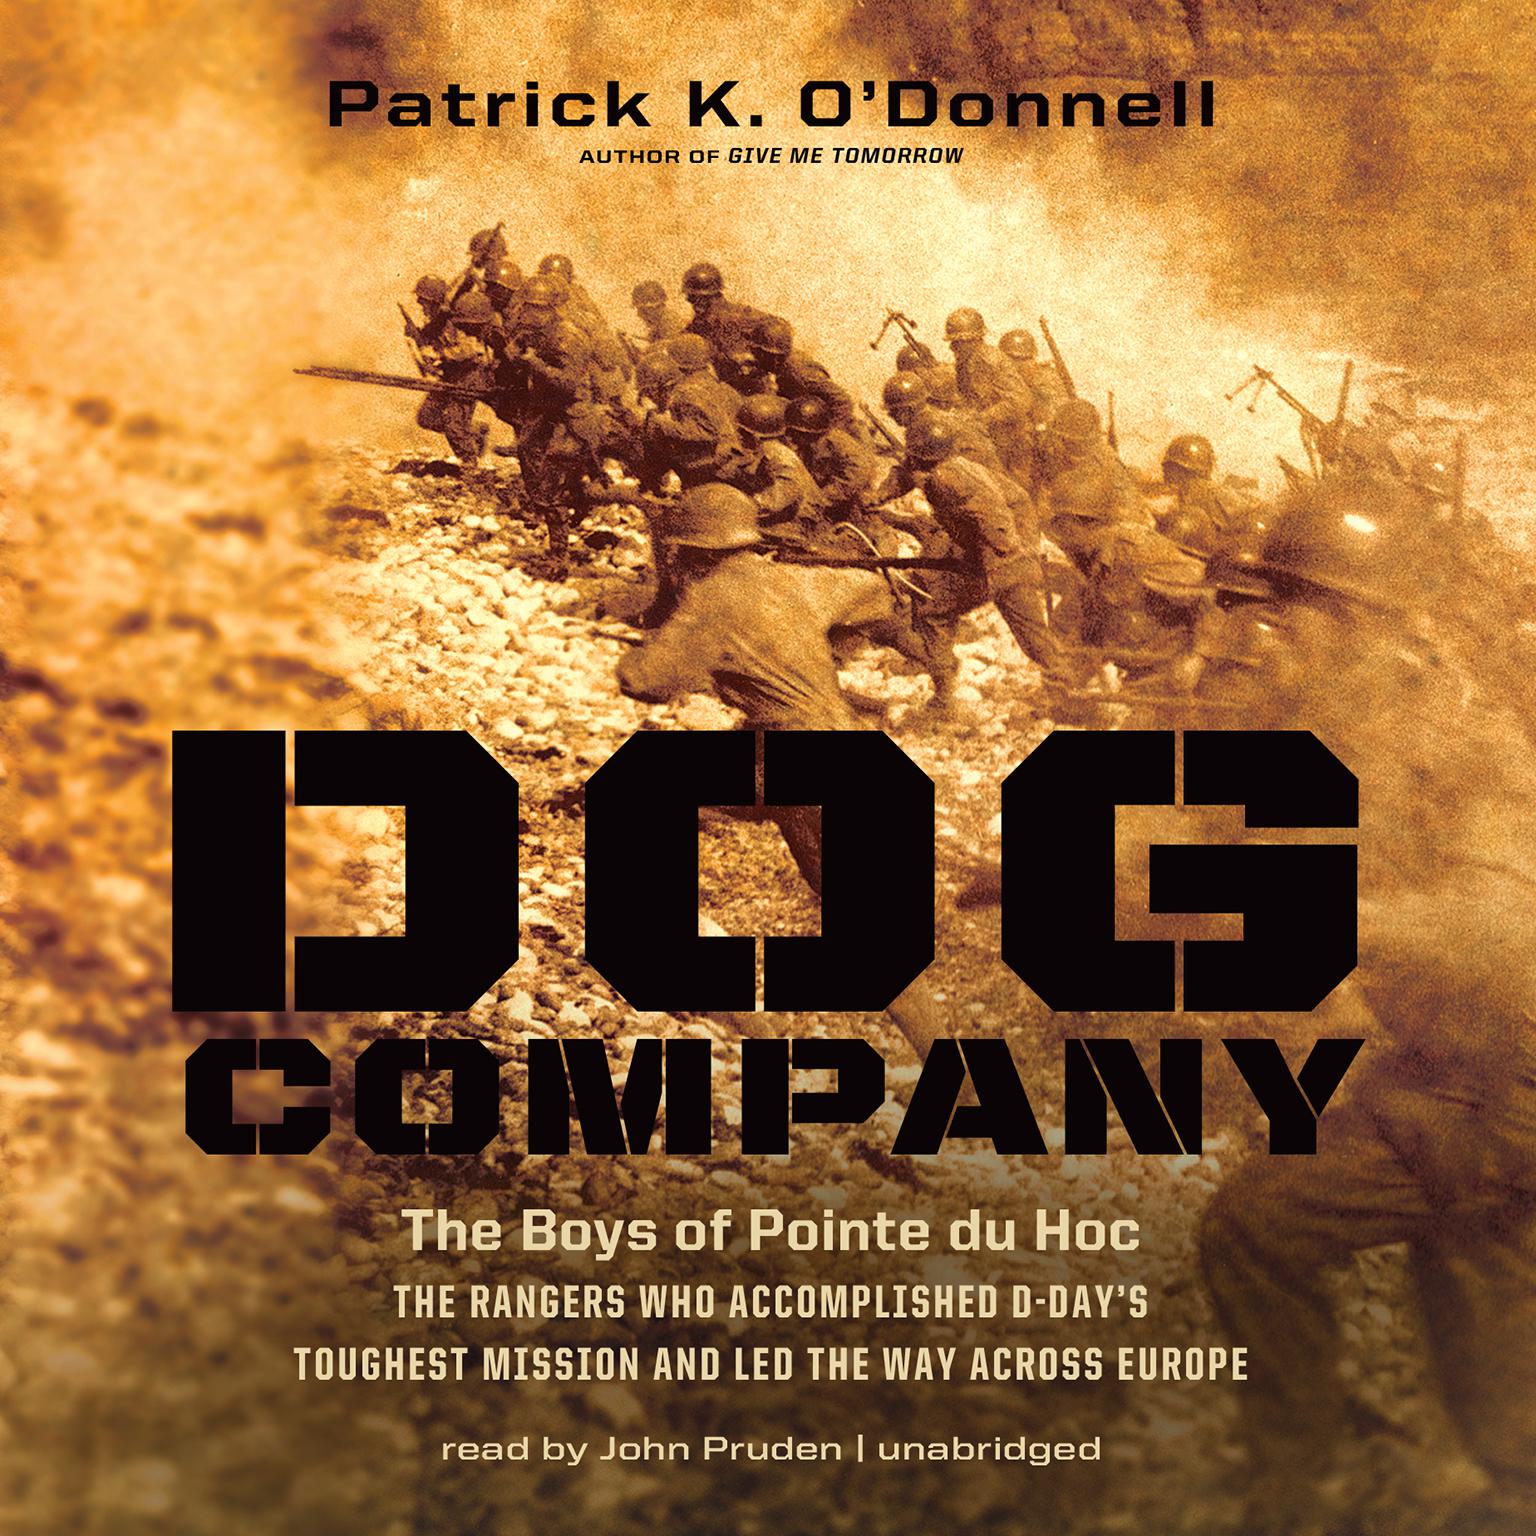 Dog Company: The Boys of Pointe du Hoc—the Rangers Who Accomplished D-Day’s Toughest Mission and Led the Way across Europe Audiobook, by Patrick K. O’Donnell